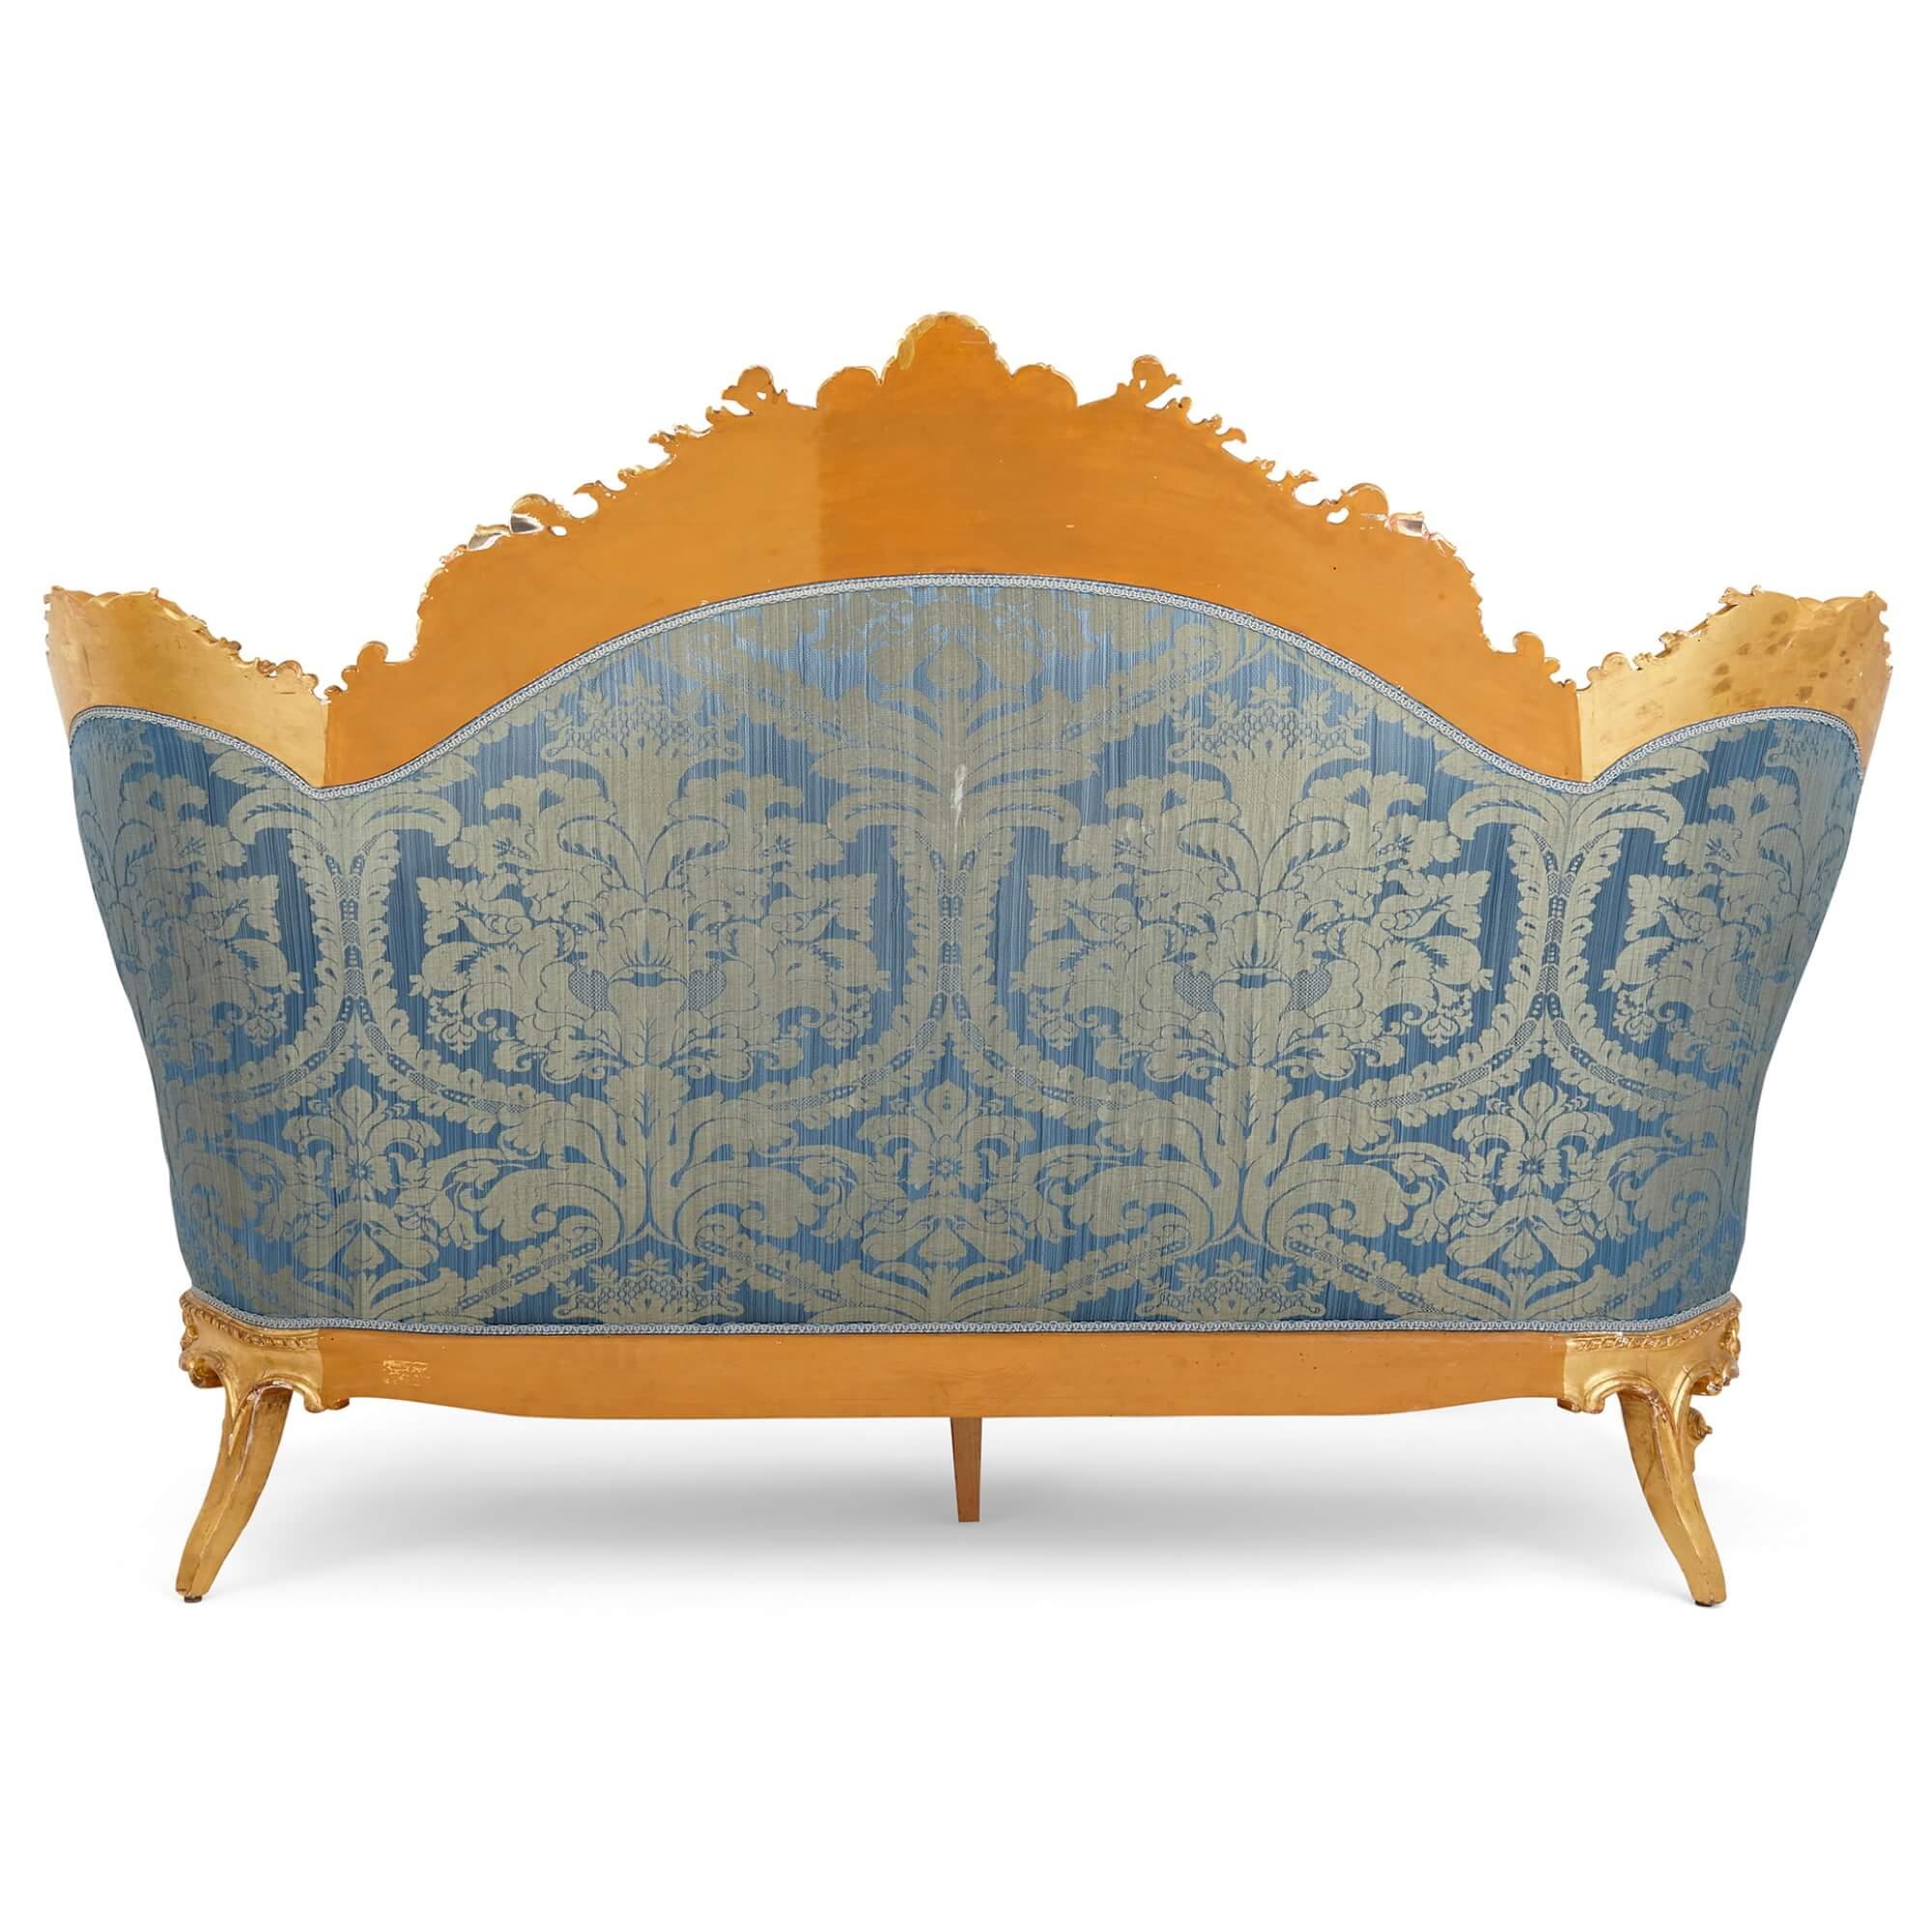 Large French Rococo Revival Style Giltwood Sofa For Sale 2